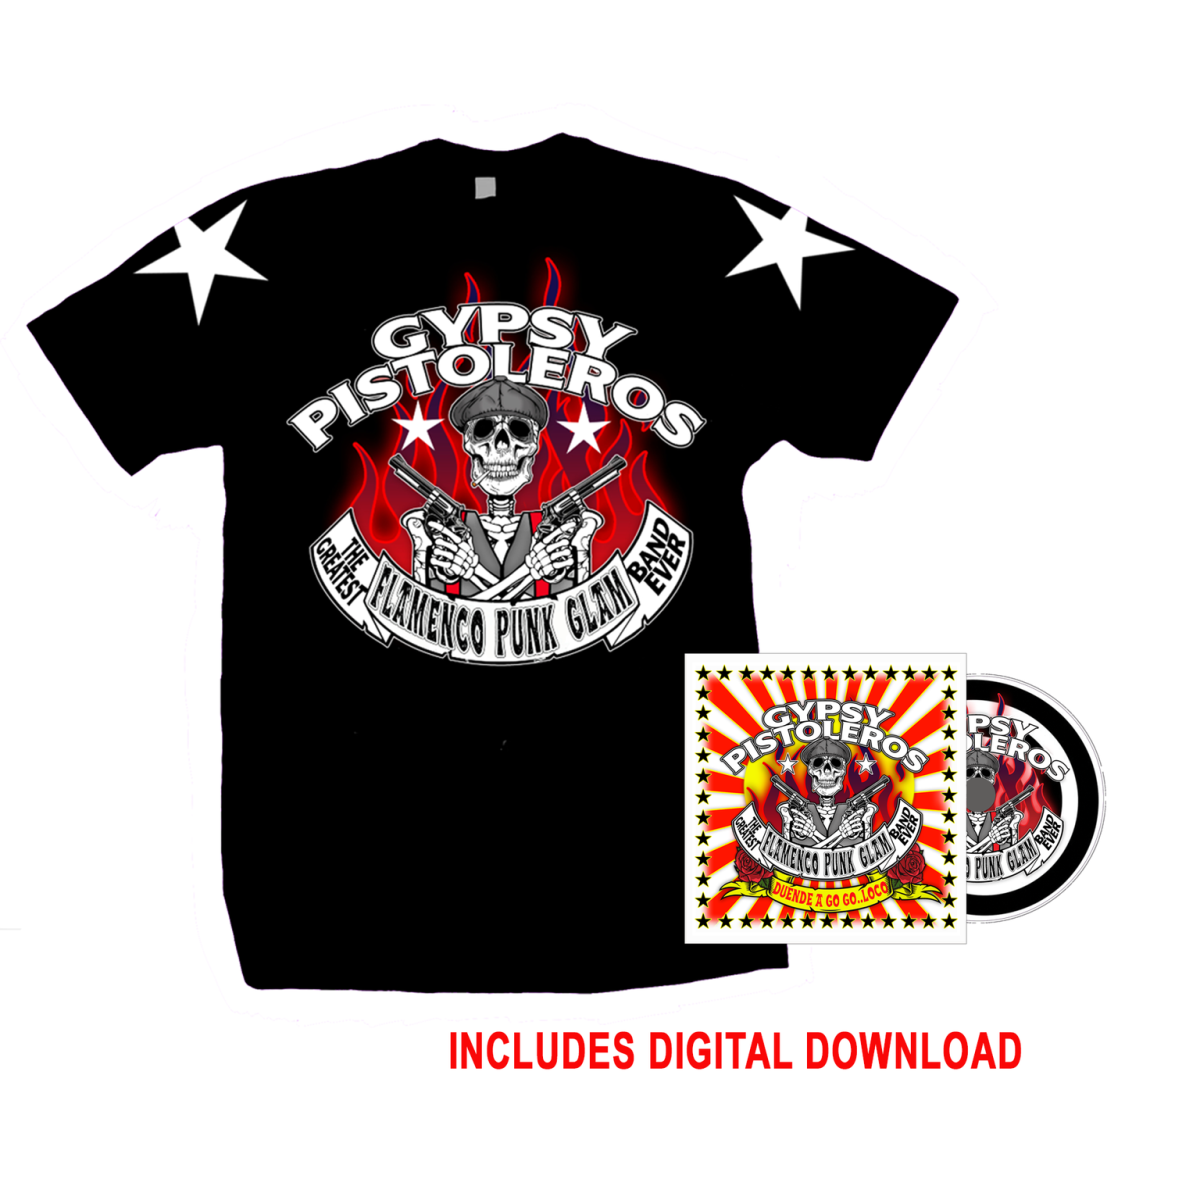 Gypsy Pistoleros "Duende a Go Go Loco" Signed CD, T shirt & Download